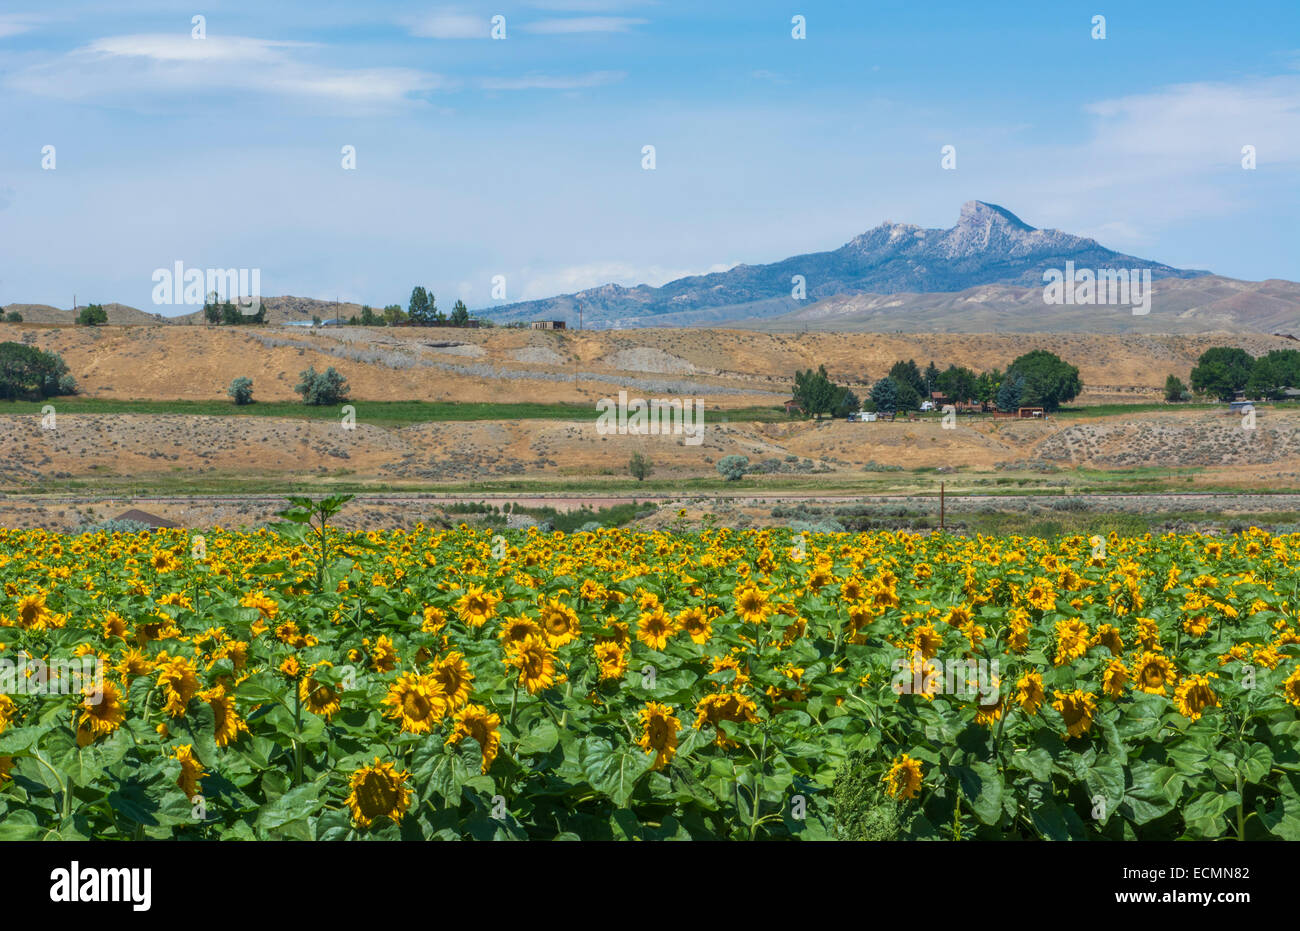 Cody Wyoming sunflower fields outside city with scenic mountains in background Stock Photo